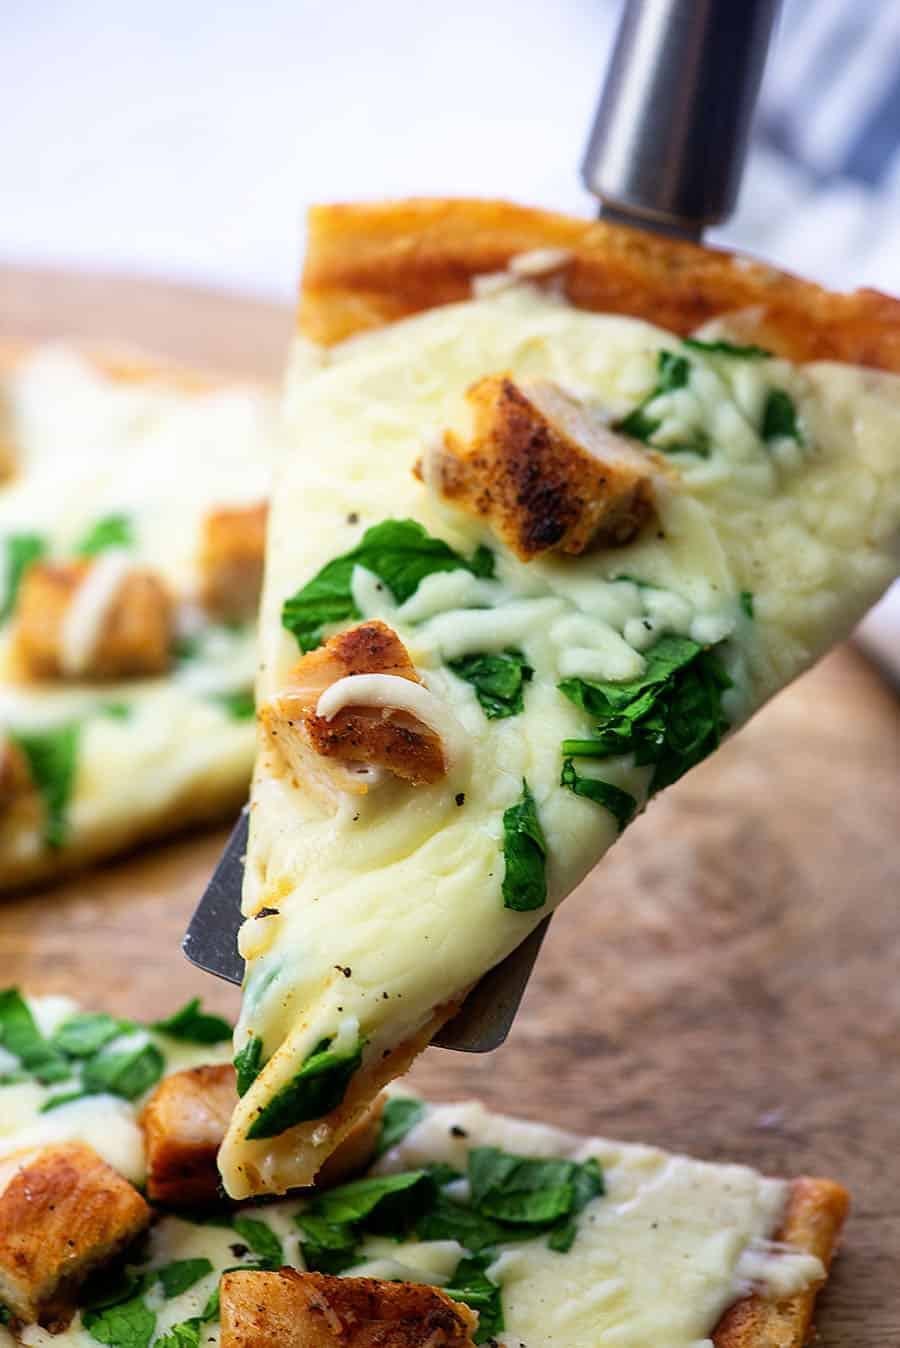 A close up of a slice of chicken pizza being held up to the camera